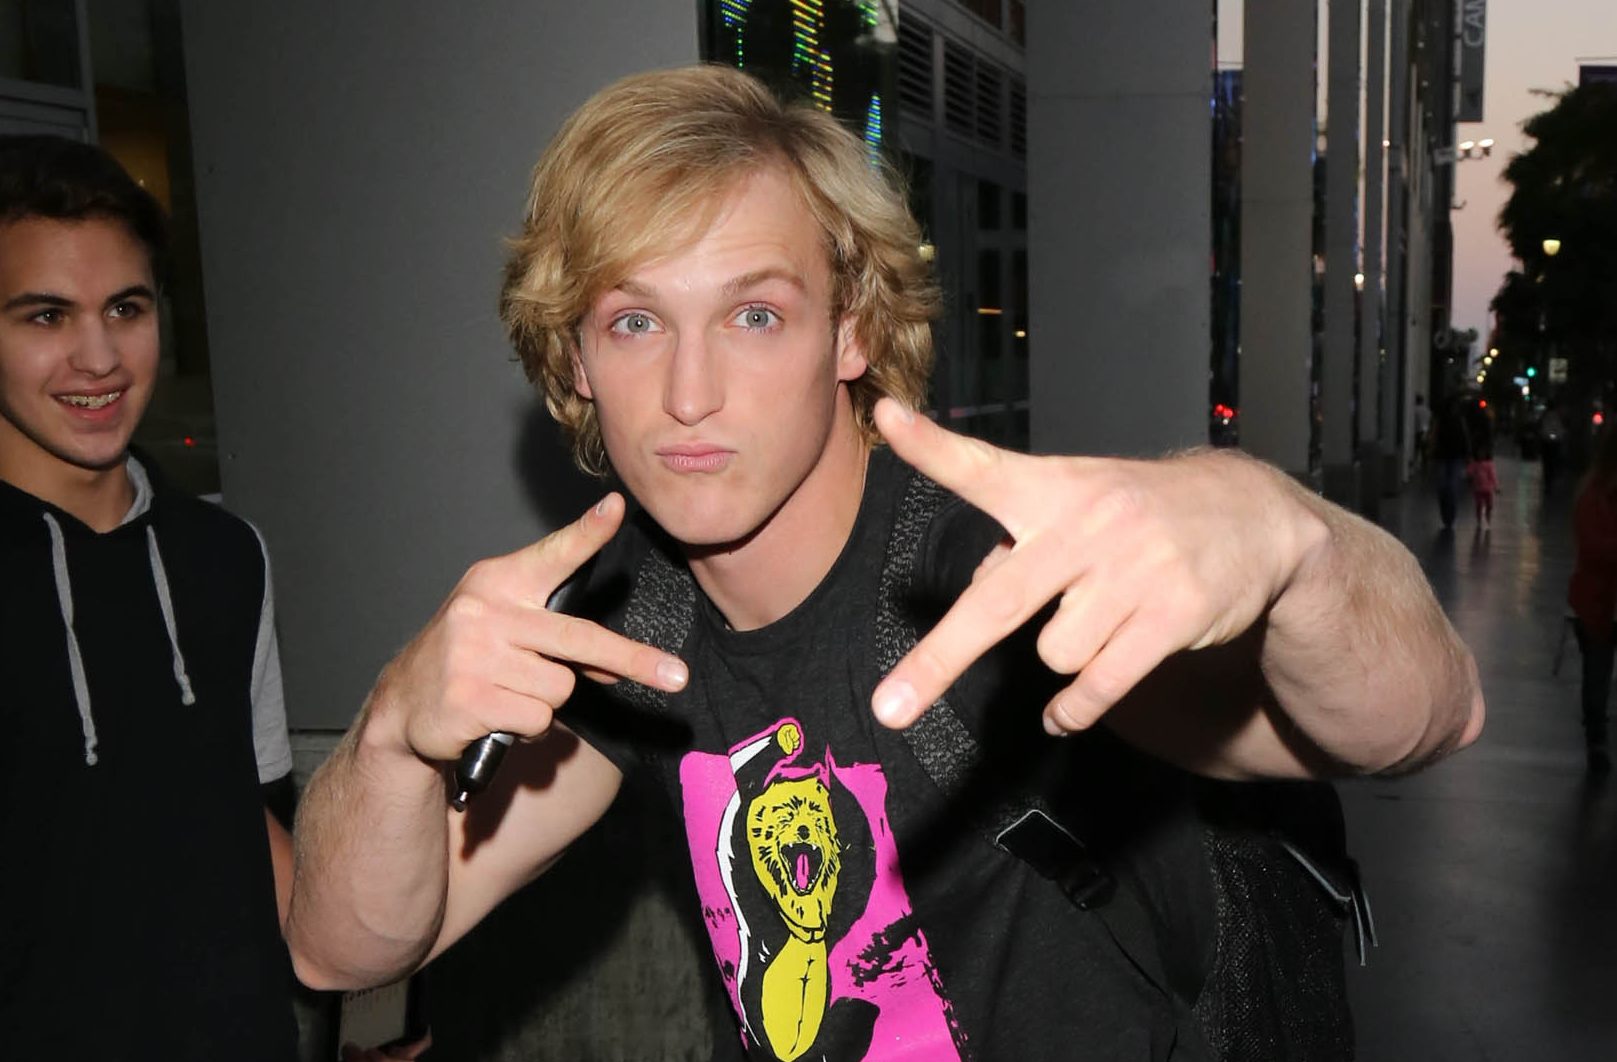 A Sensitive And Grown-Up Logan Paul Returns To YouTube By Tasering A Dead Rat